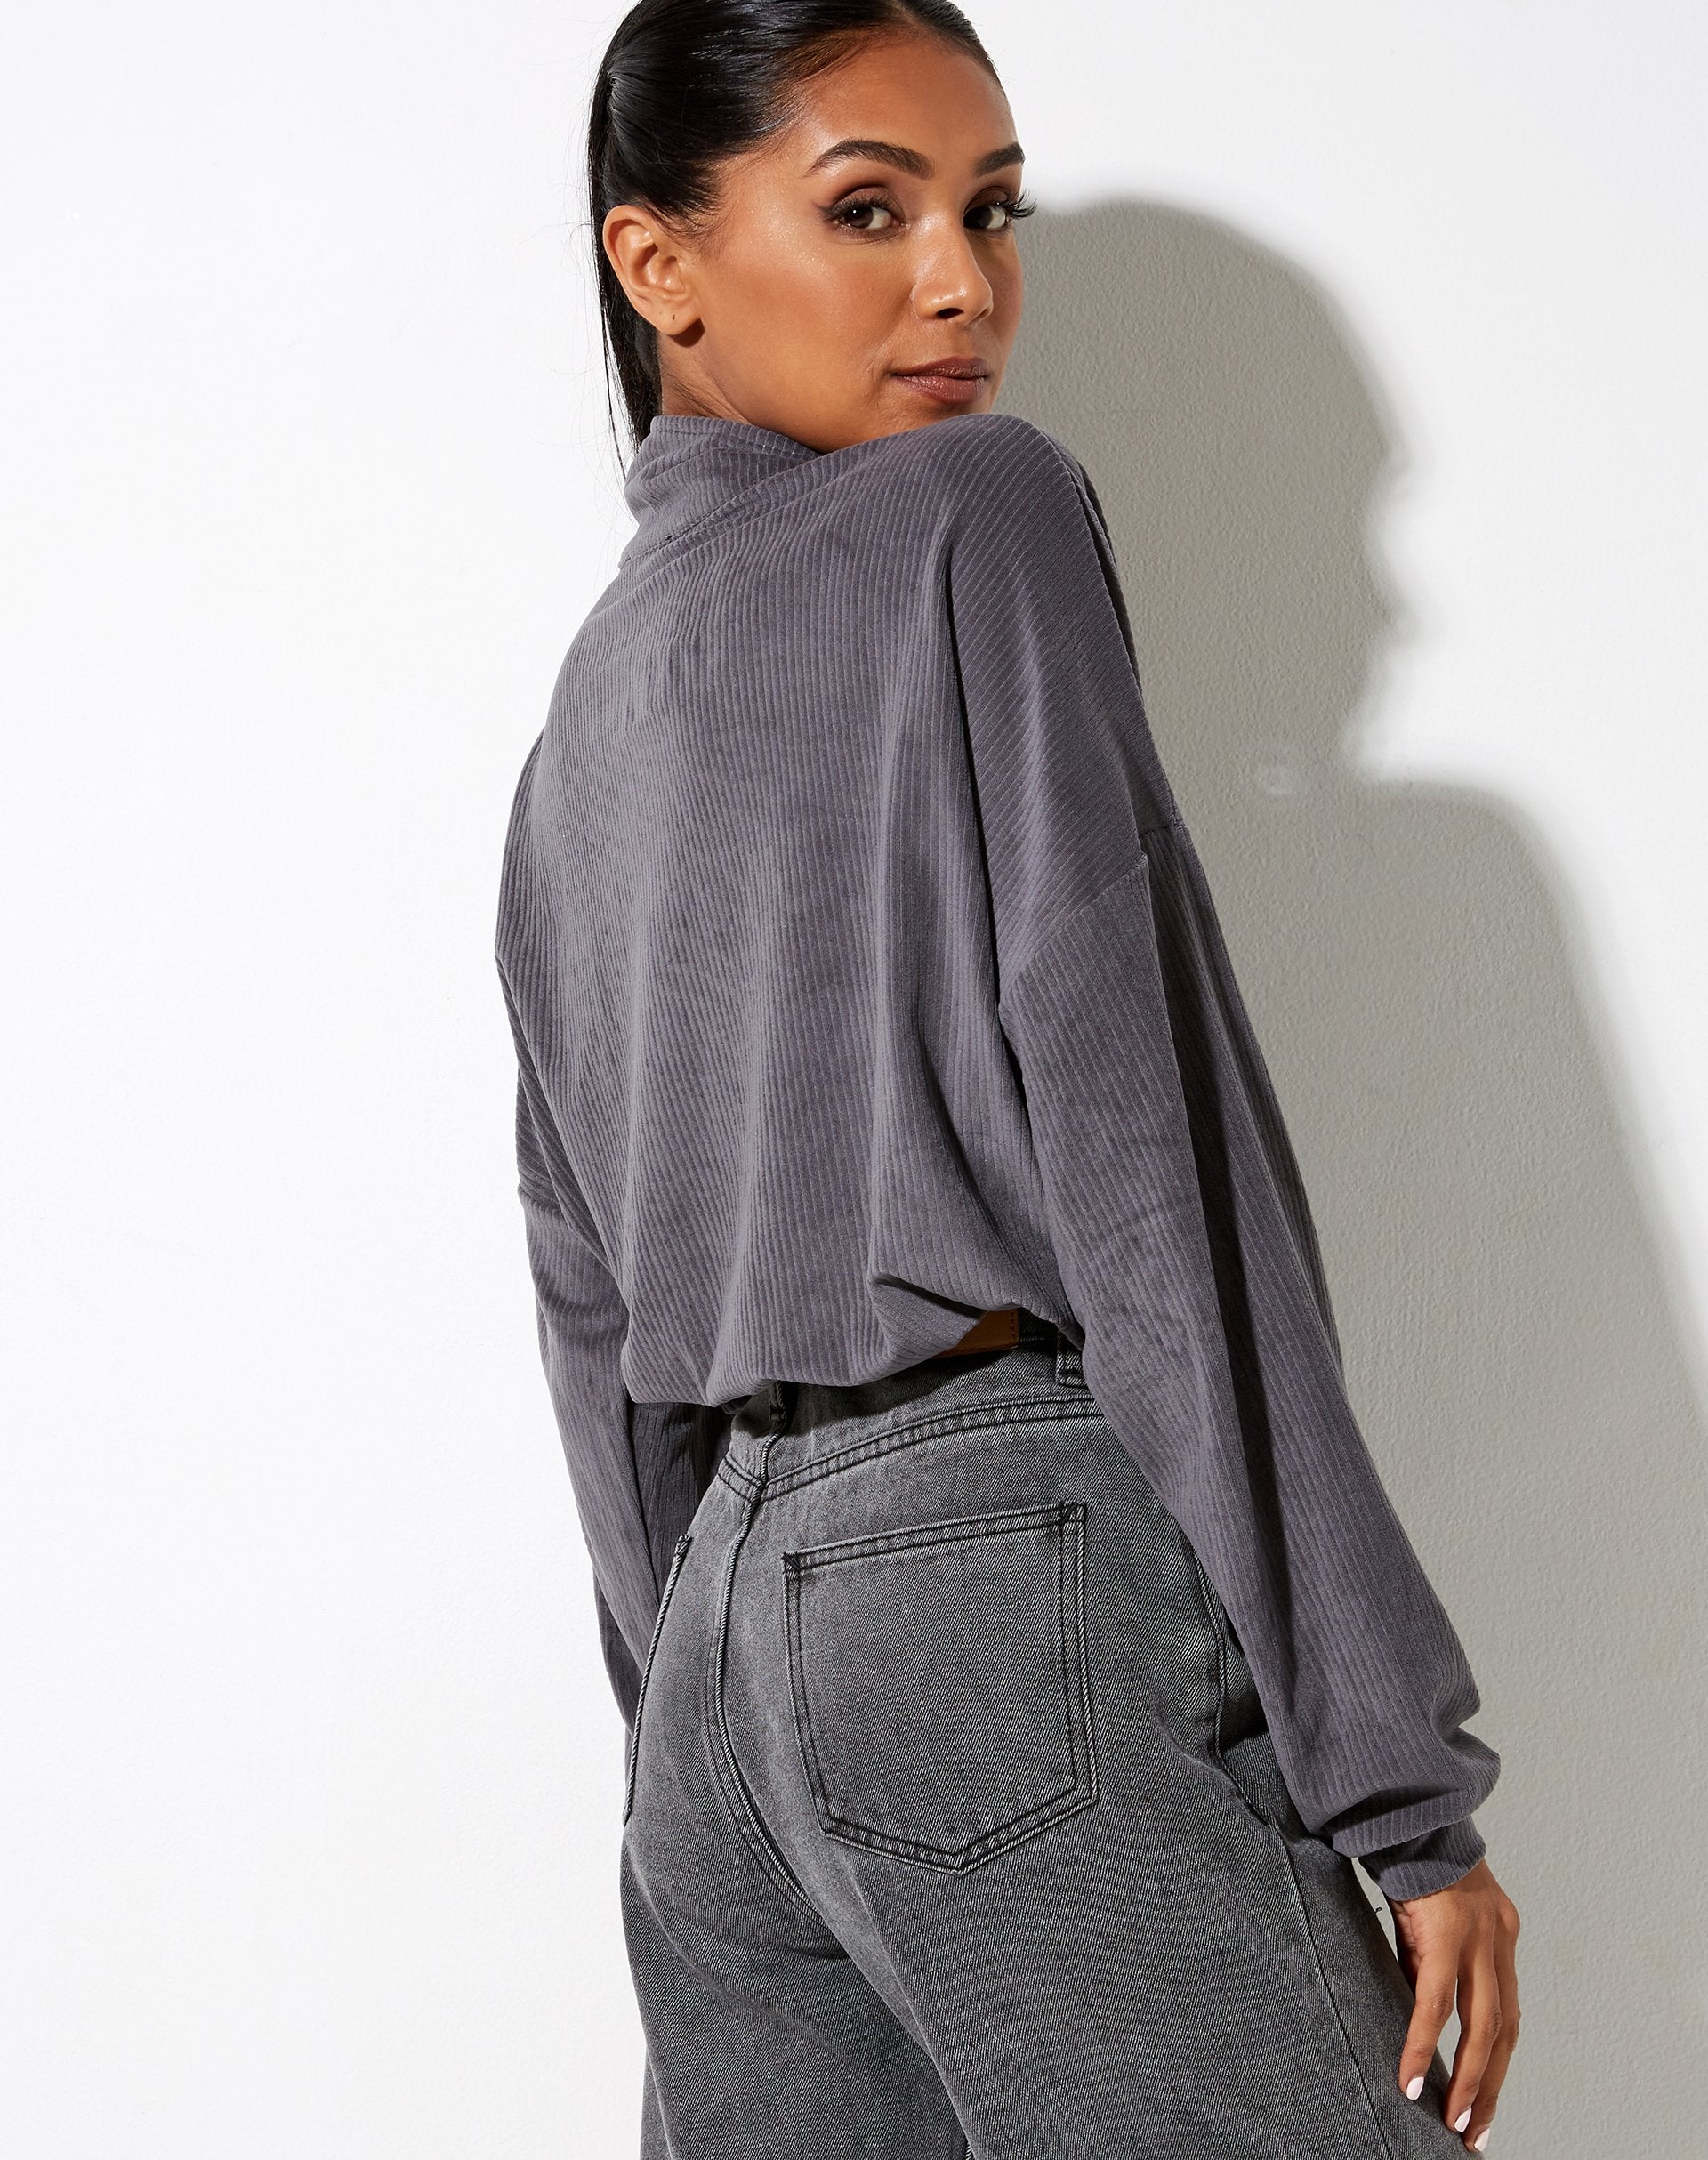 Image of Olini Jumper in Charcoal Grey Angel Embro